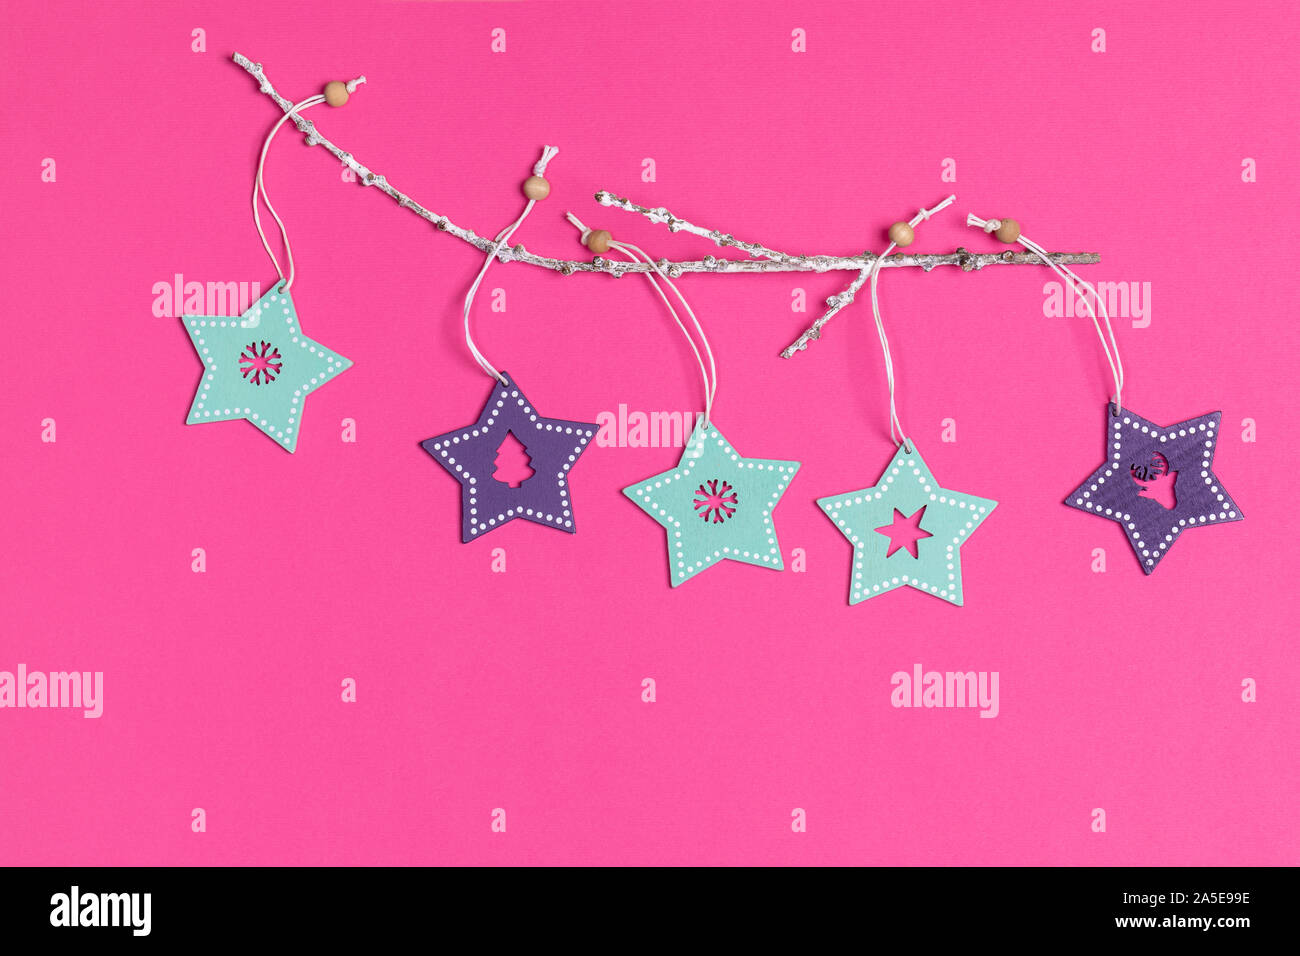 Xmas decorations. Christmas toys turquoise and purple painted wooden stars on white twig on bright pink background. Top view. Stock Photo